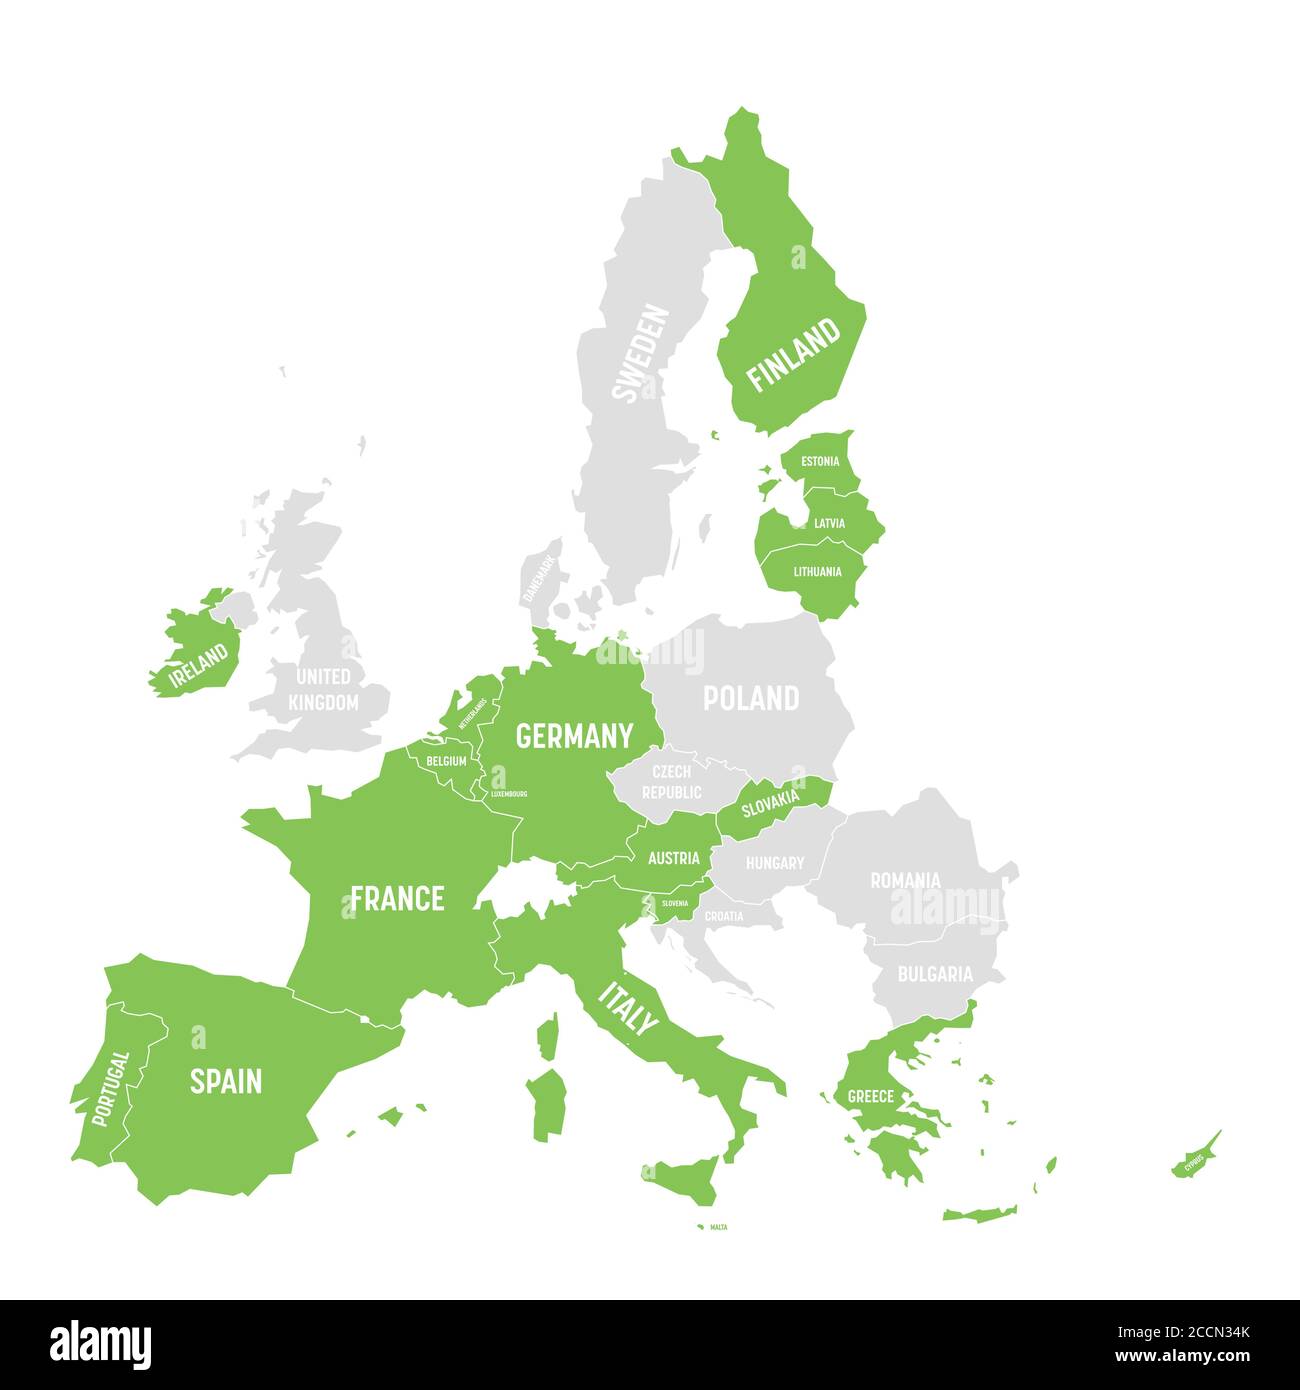 Map of Eurozone. States using Euro currency. Grey vector map of EU member states with green highlighted Eurozone countries. Stock Vector